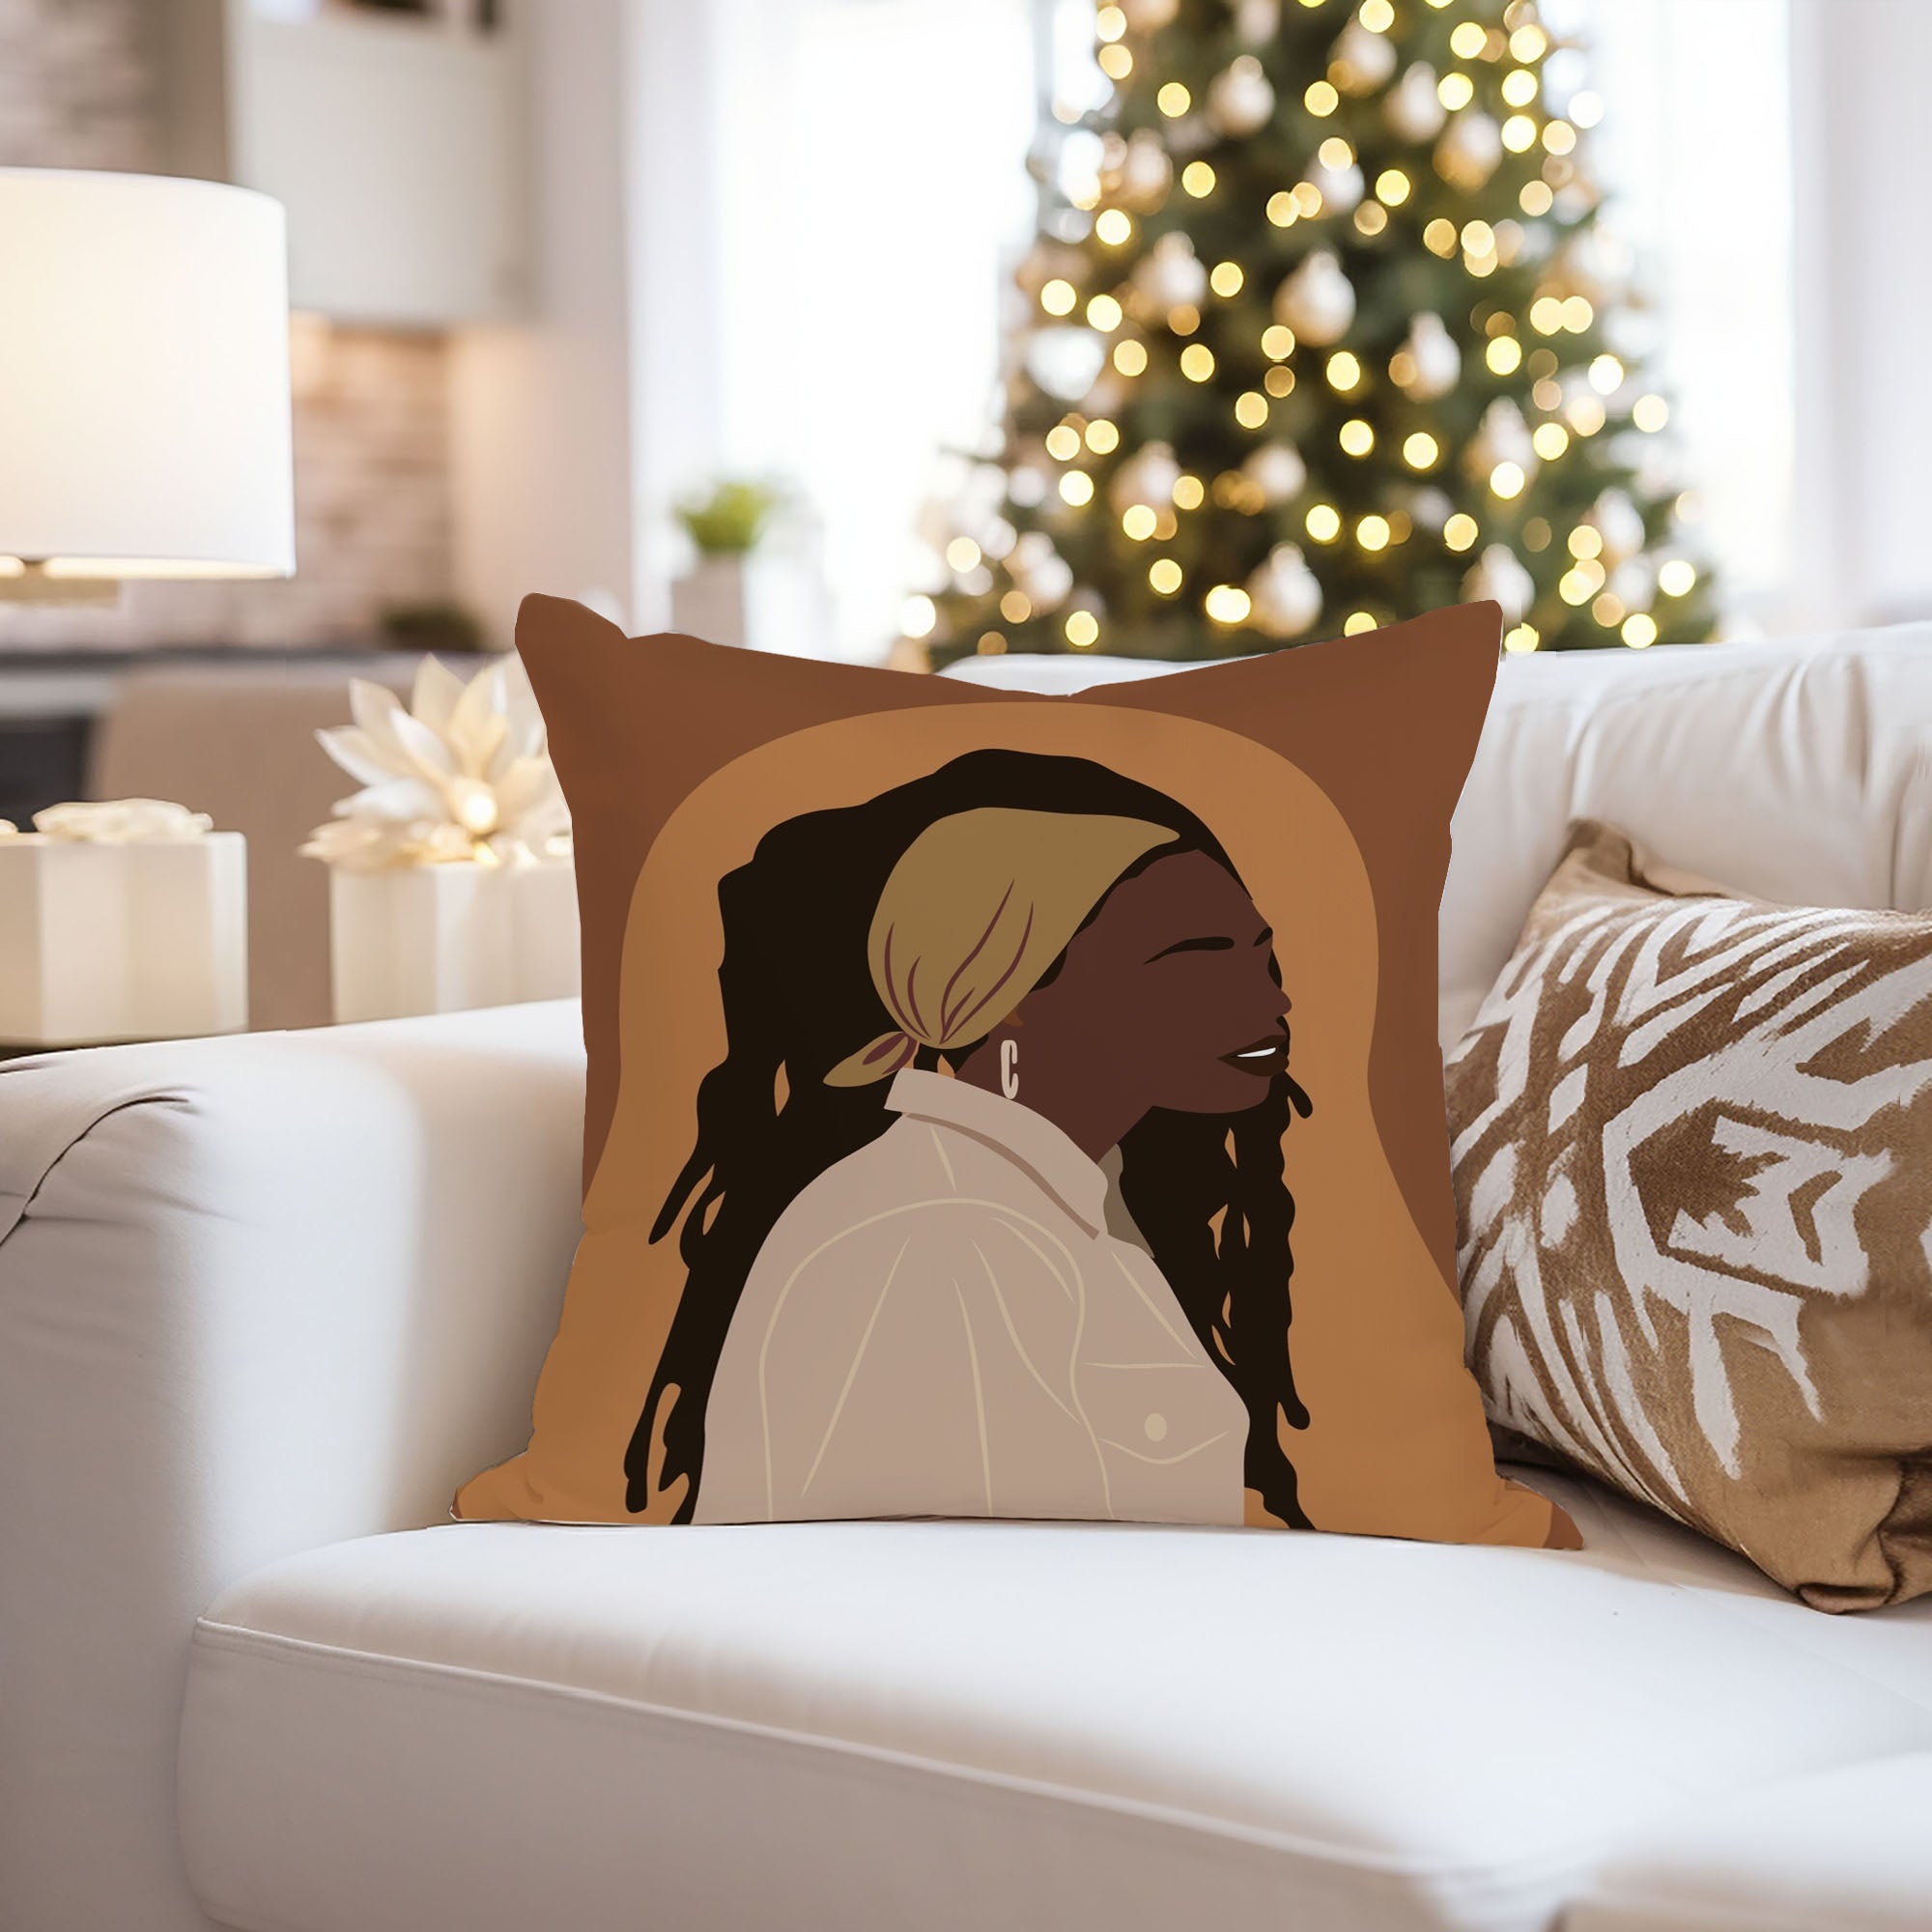 Ethan Taylor People and Portraits Throw Pillow Soft Cushion Cover 'African American Woman Portrait Portraits Female' Bohemian Pattern Decorative Square Accent Pillow Case, 16x16 Inches, Brown, Orange - image 4 of 5